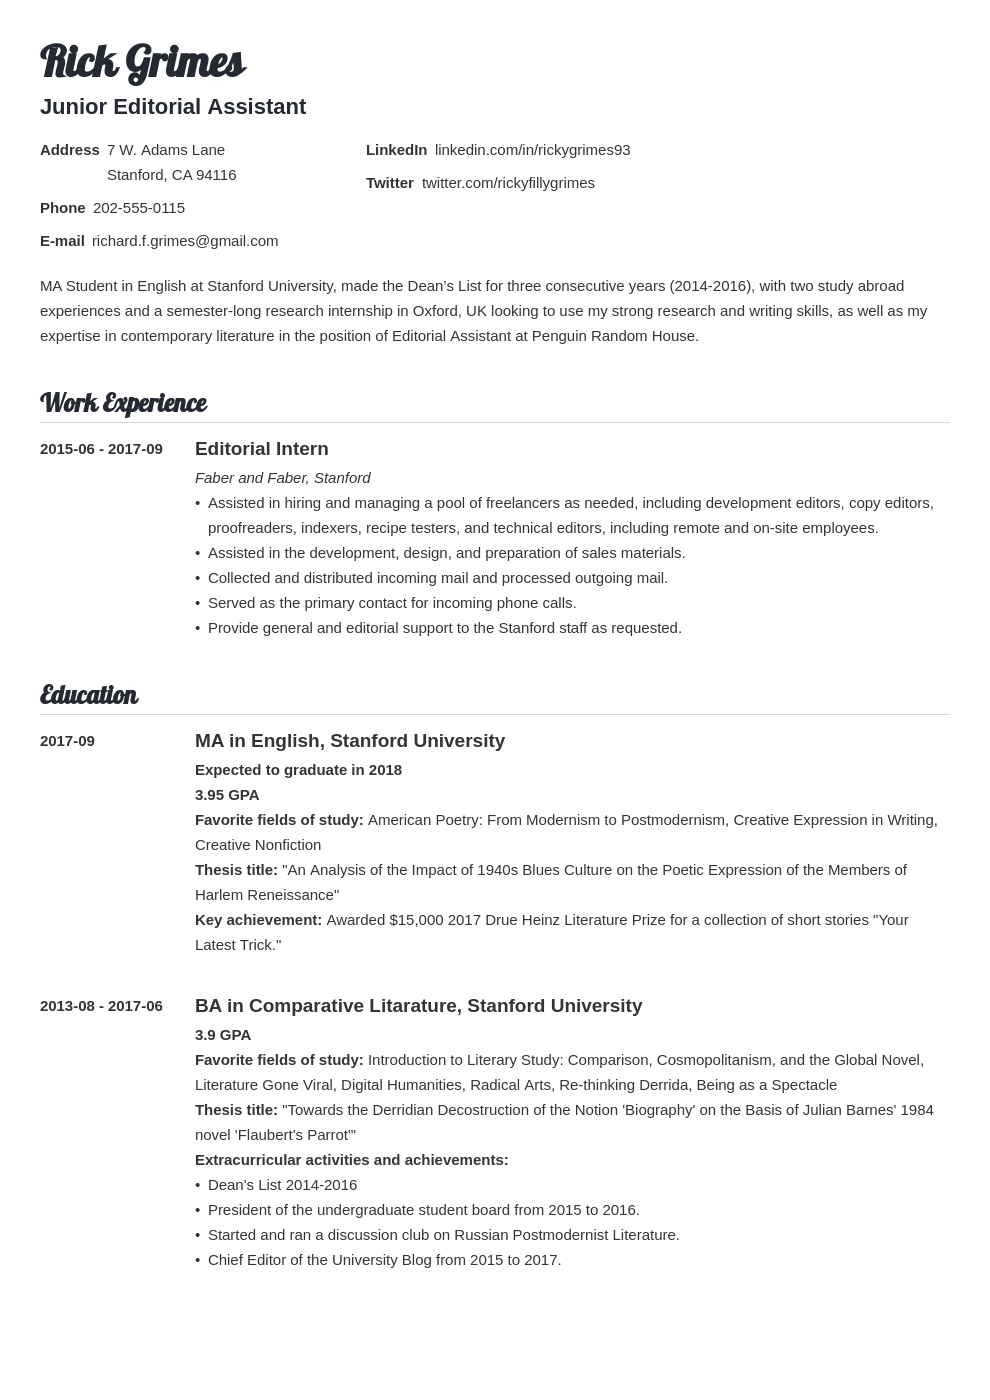 Resume Sample & Complete Writing Guide.